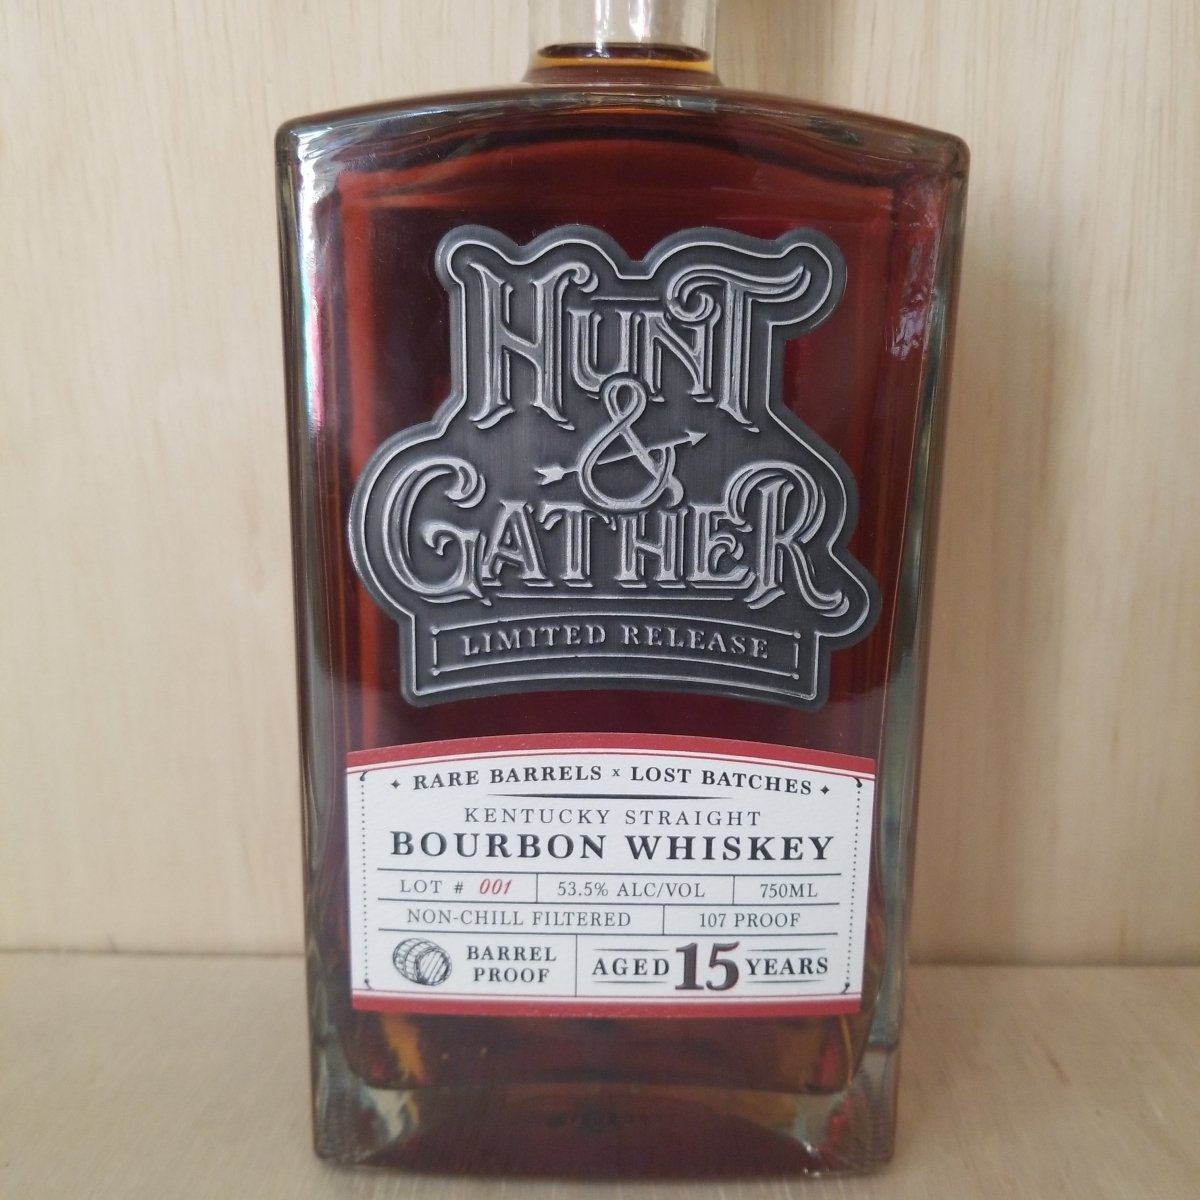 Hunt &amp; Gather 15 Year Old Barrel Proof Straight Bourbon 2020, 750ml (Lot 1, proof 107) - Sip &amp; Say